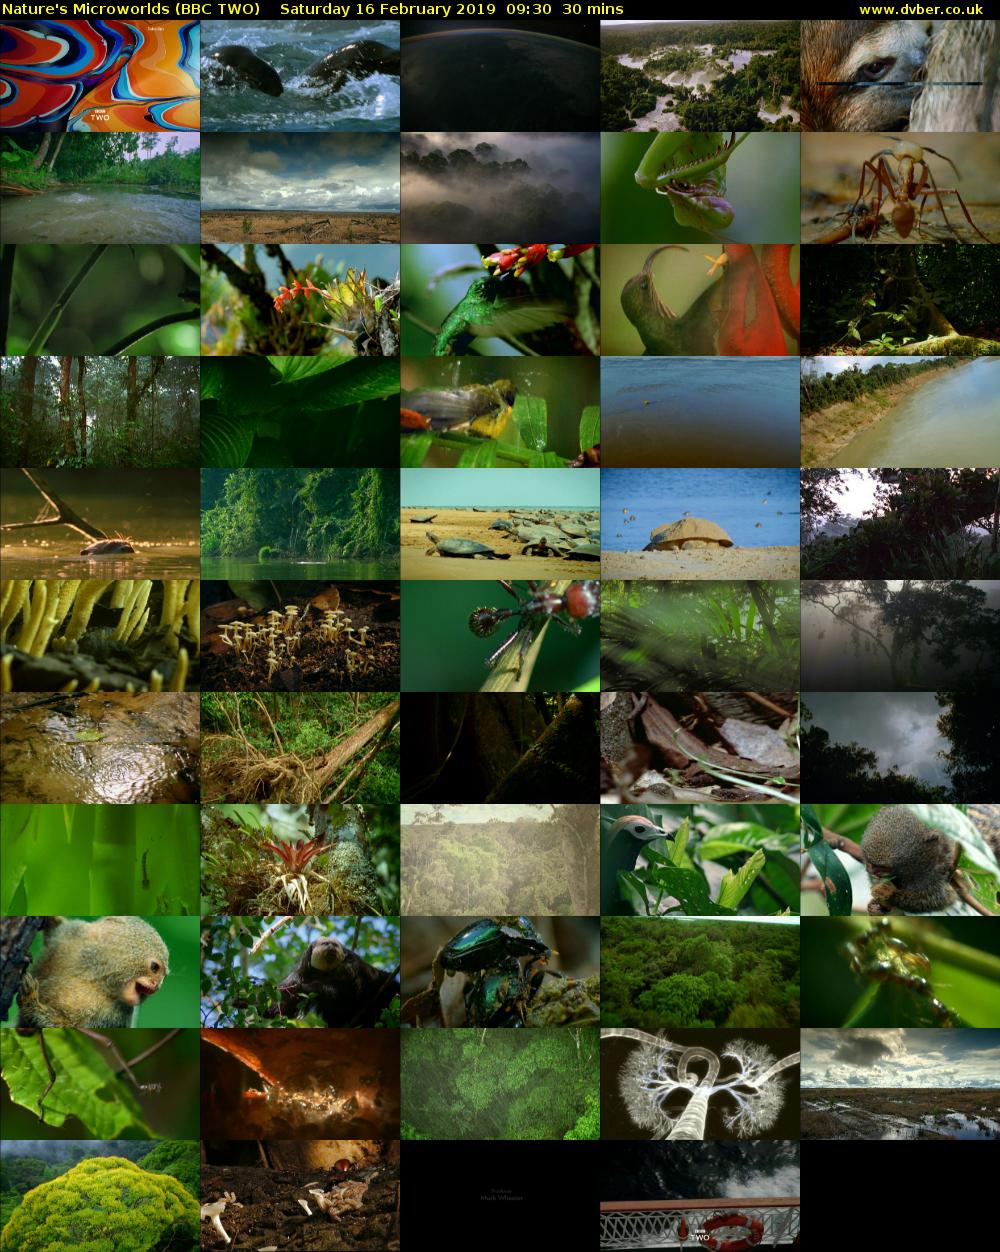 Nature's Microworlds (BBC TWO) Saturday 16 February 2019 09:30 - 10:00